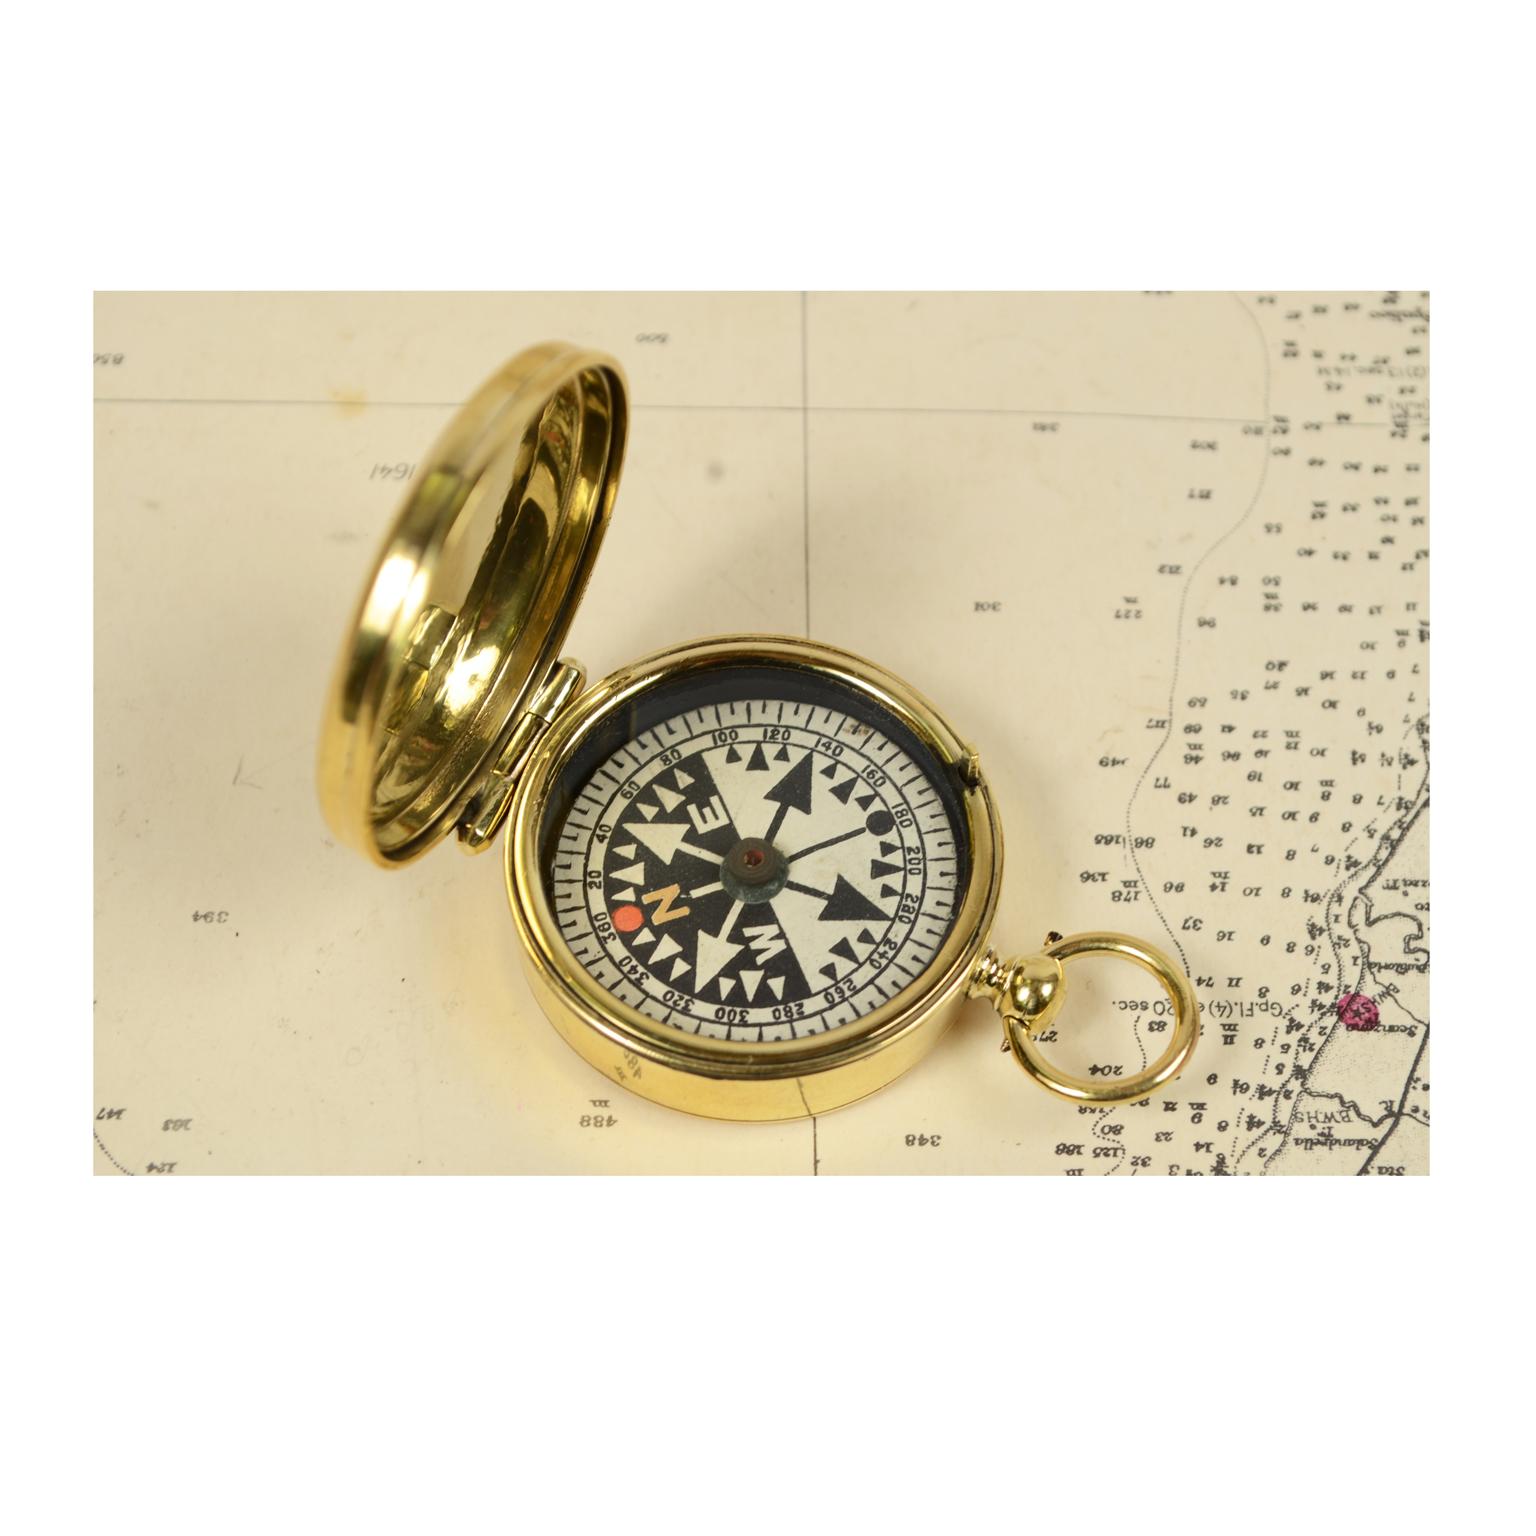 Nautical pocket compass made of turned brass signed Lawrence & Mayo London from the early 1900s. The compass is complete with cover, compass card lock and chain ring. Eight winds compass card on paper complete with goniometric circle. In excellent